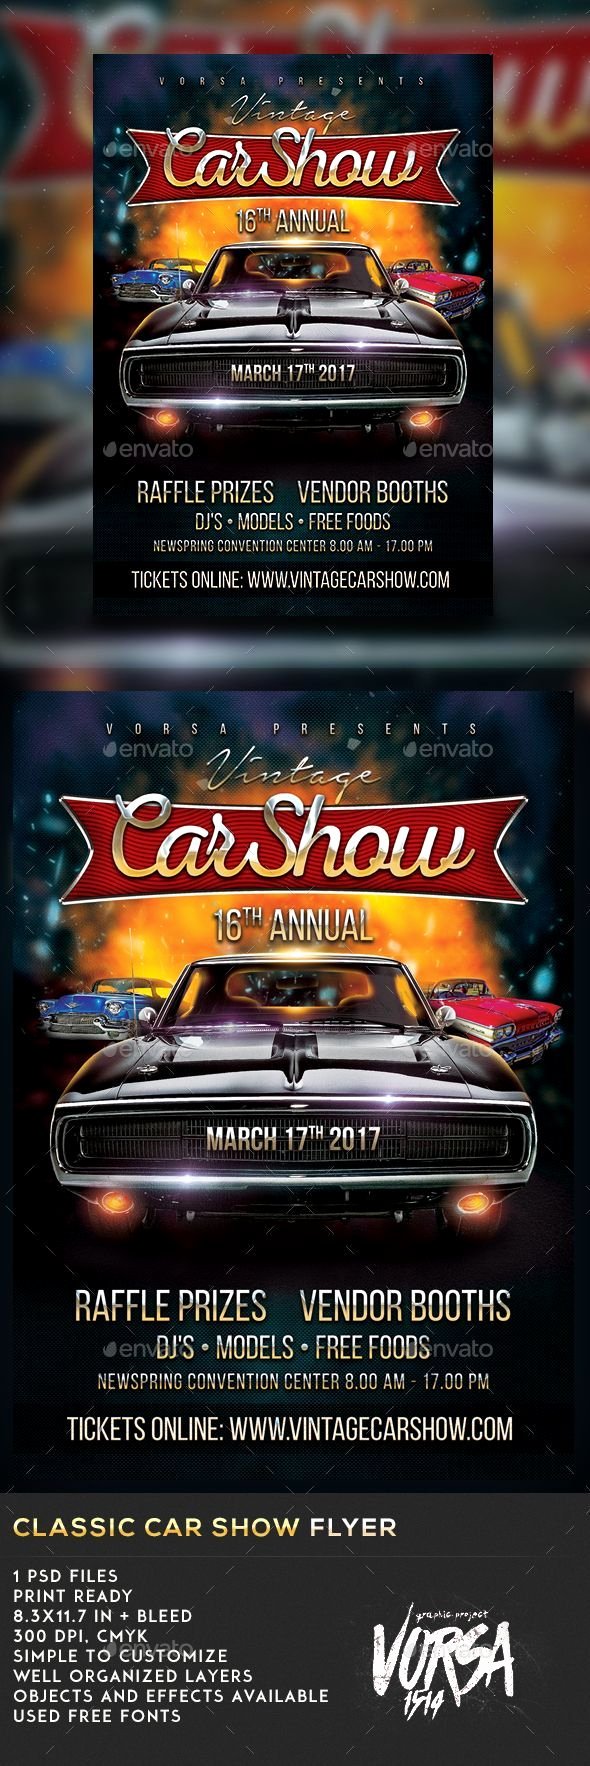 Car Show Flyer Template Free Best Of Classic Car Show Flyer Template Psd